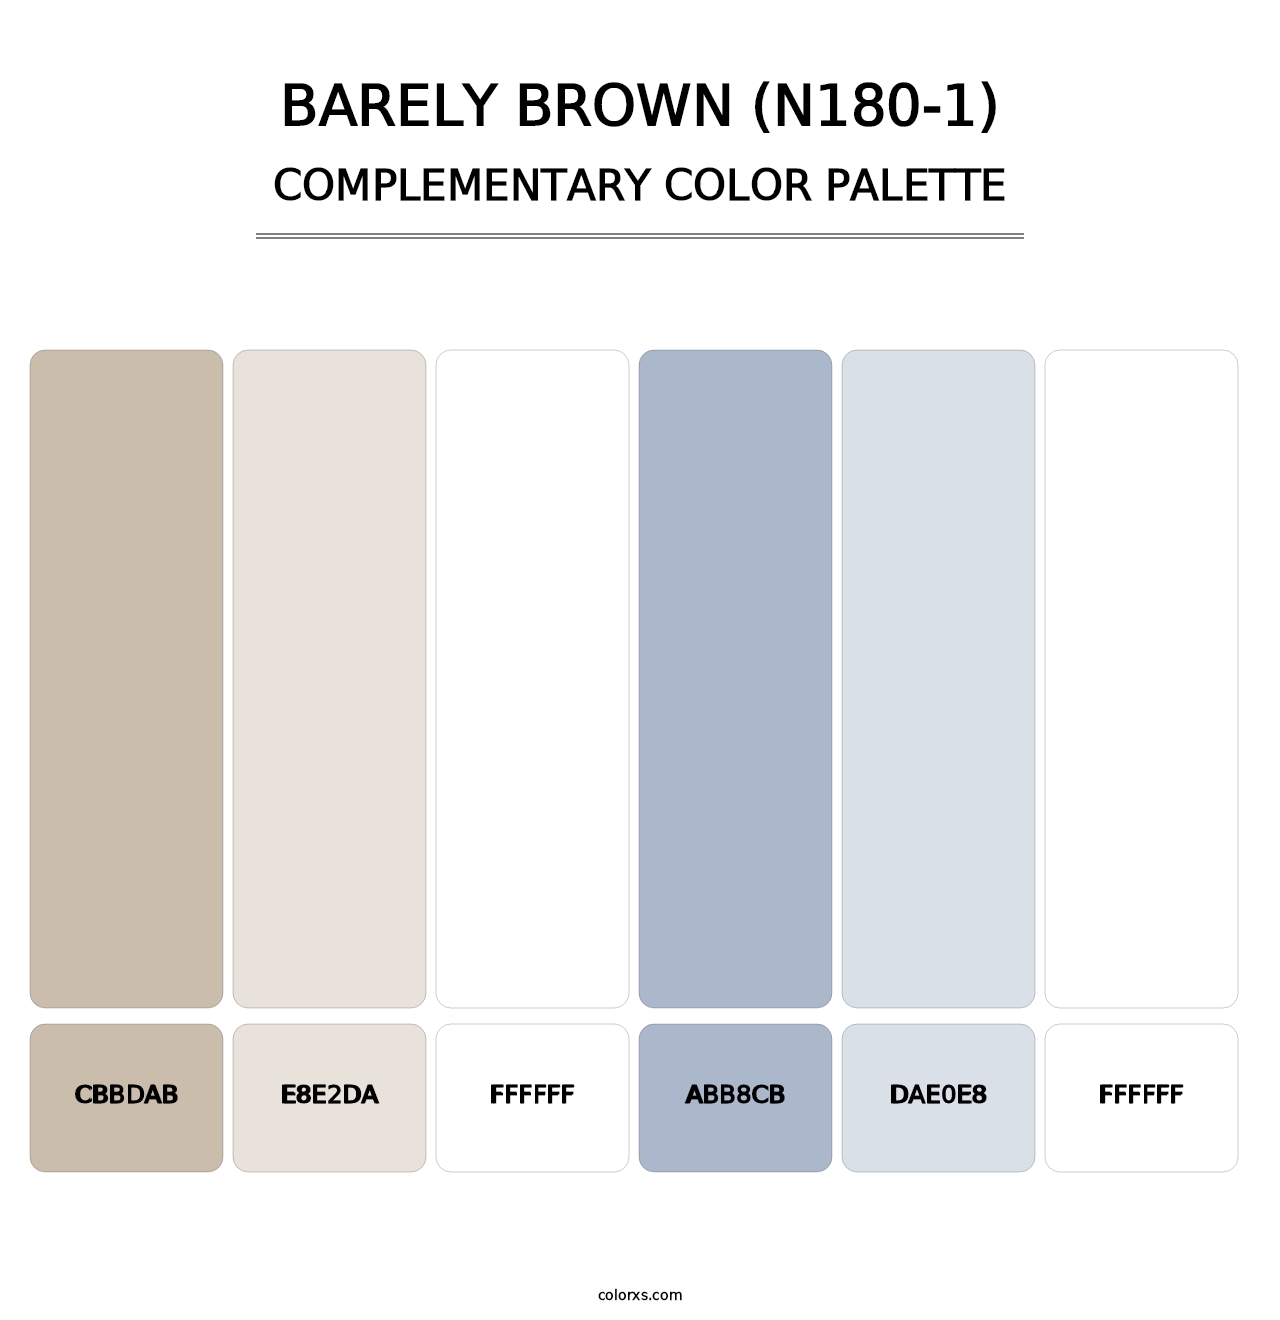 Barely Brown (N180-1) - Complementary Color Palette